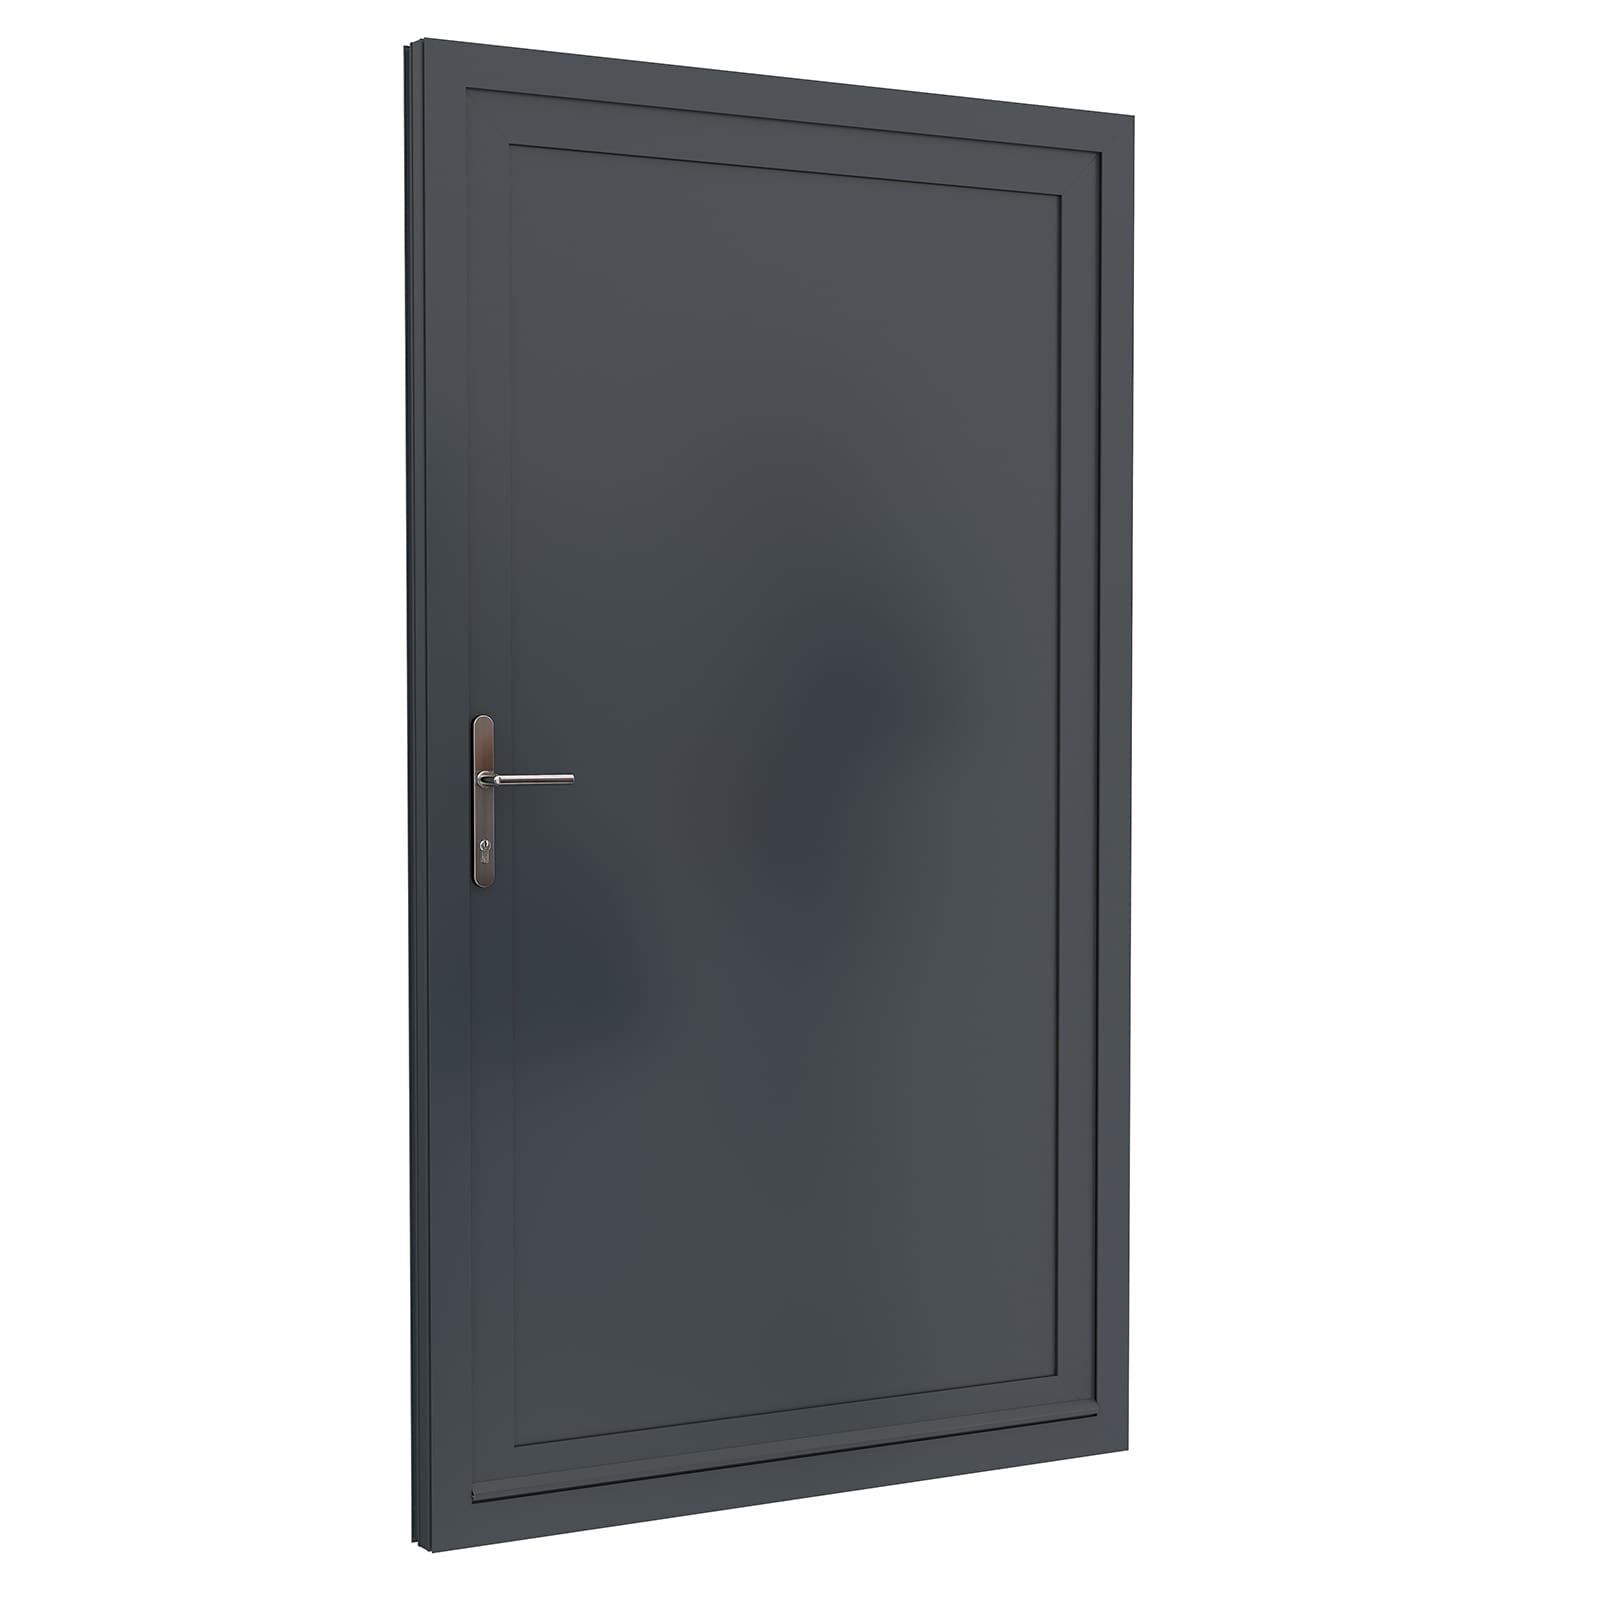 Alitherm 400 Door with PM0000P panel